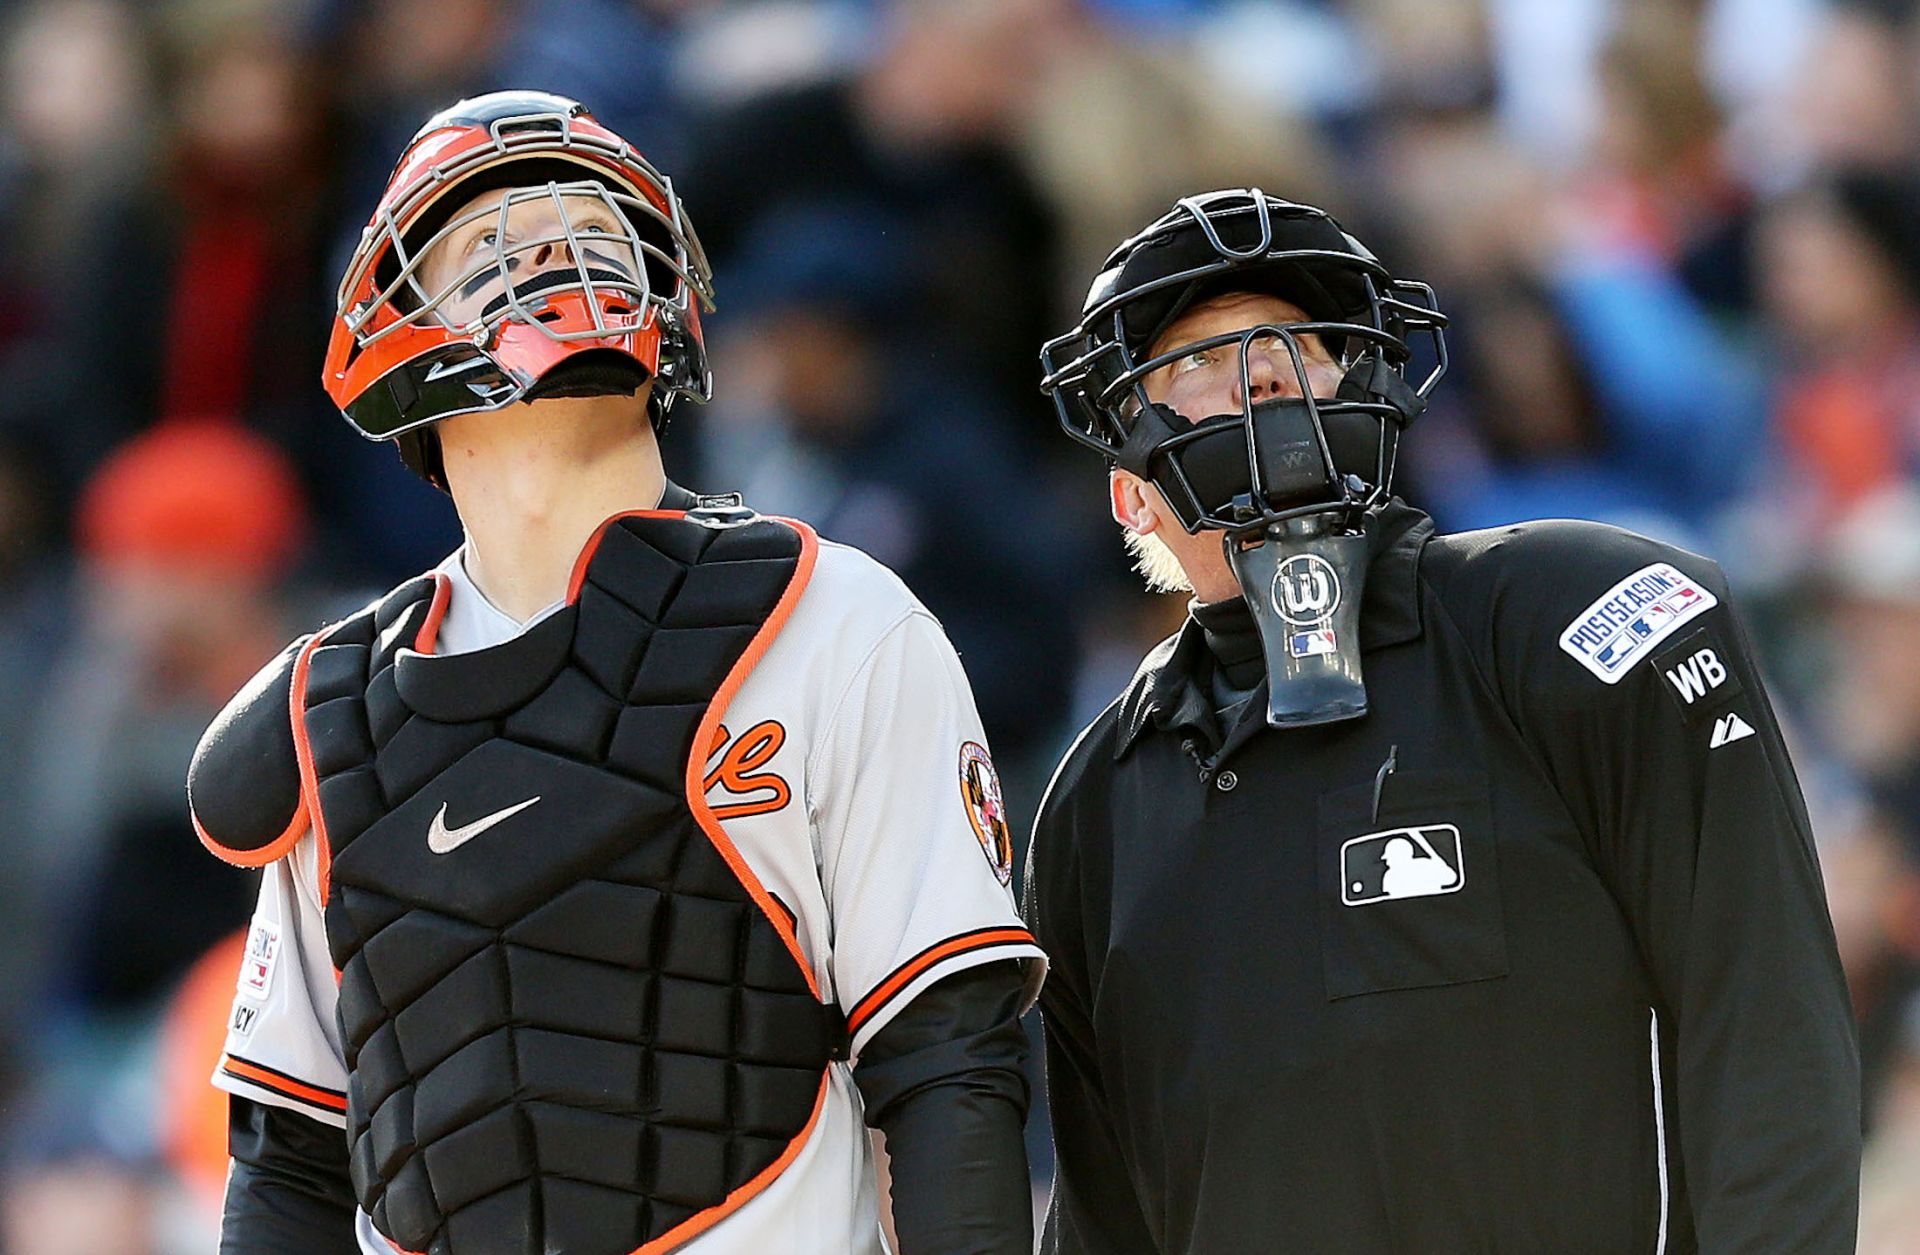 Baseball player Nick Hundley and umpire Jeff Kellogg watch a drone flying over Detroit's Comerica Park in 2014.